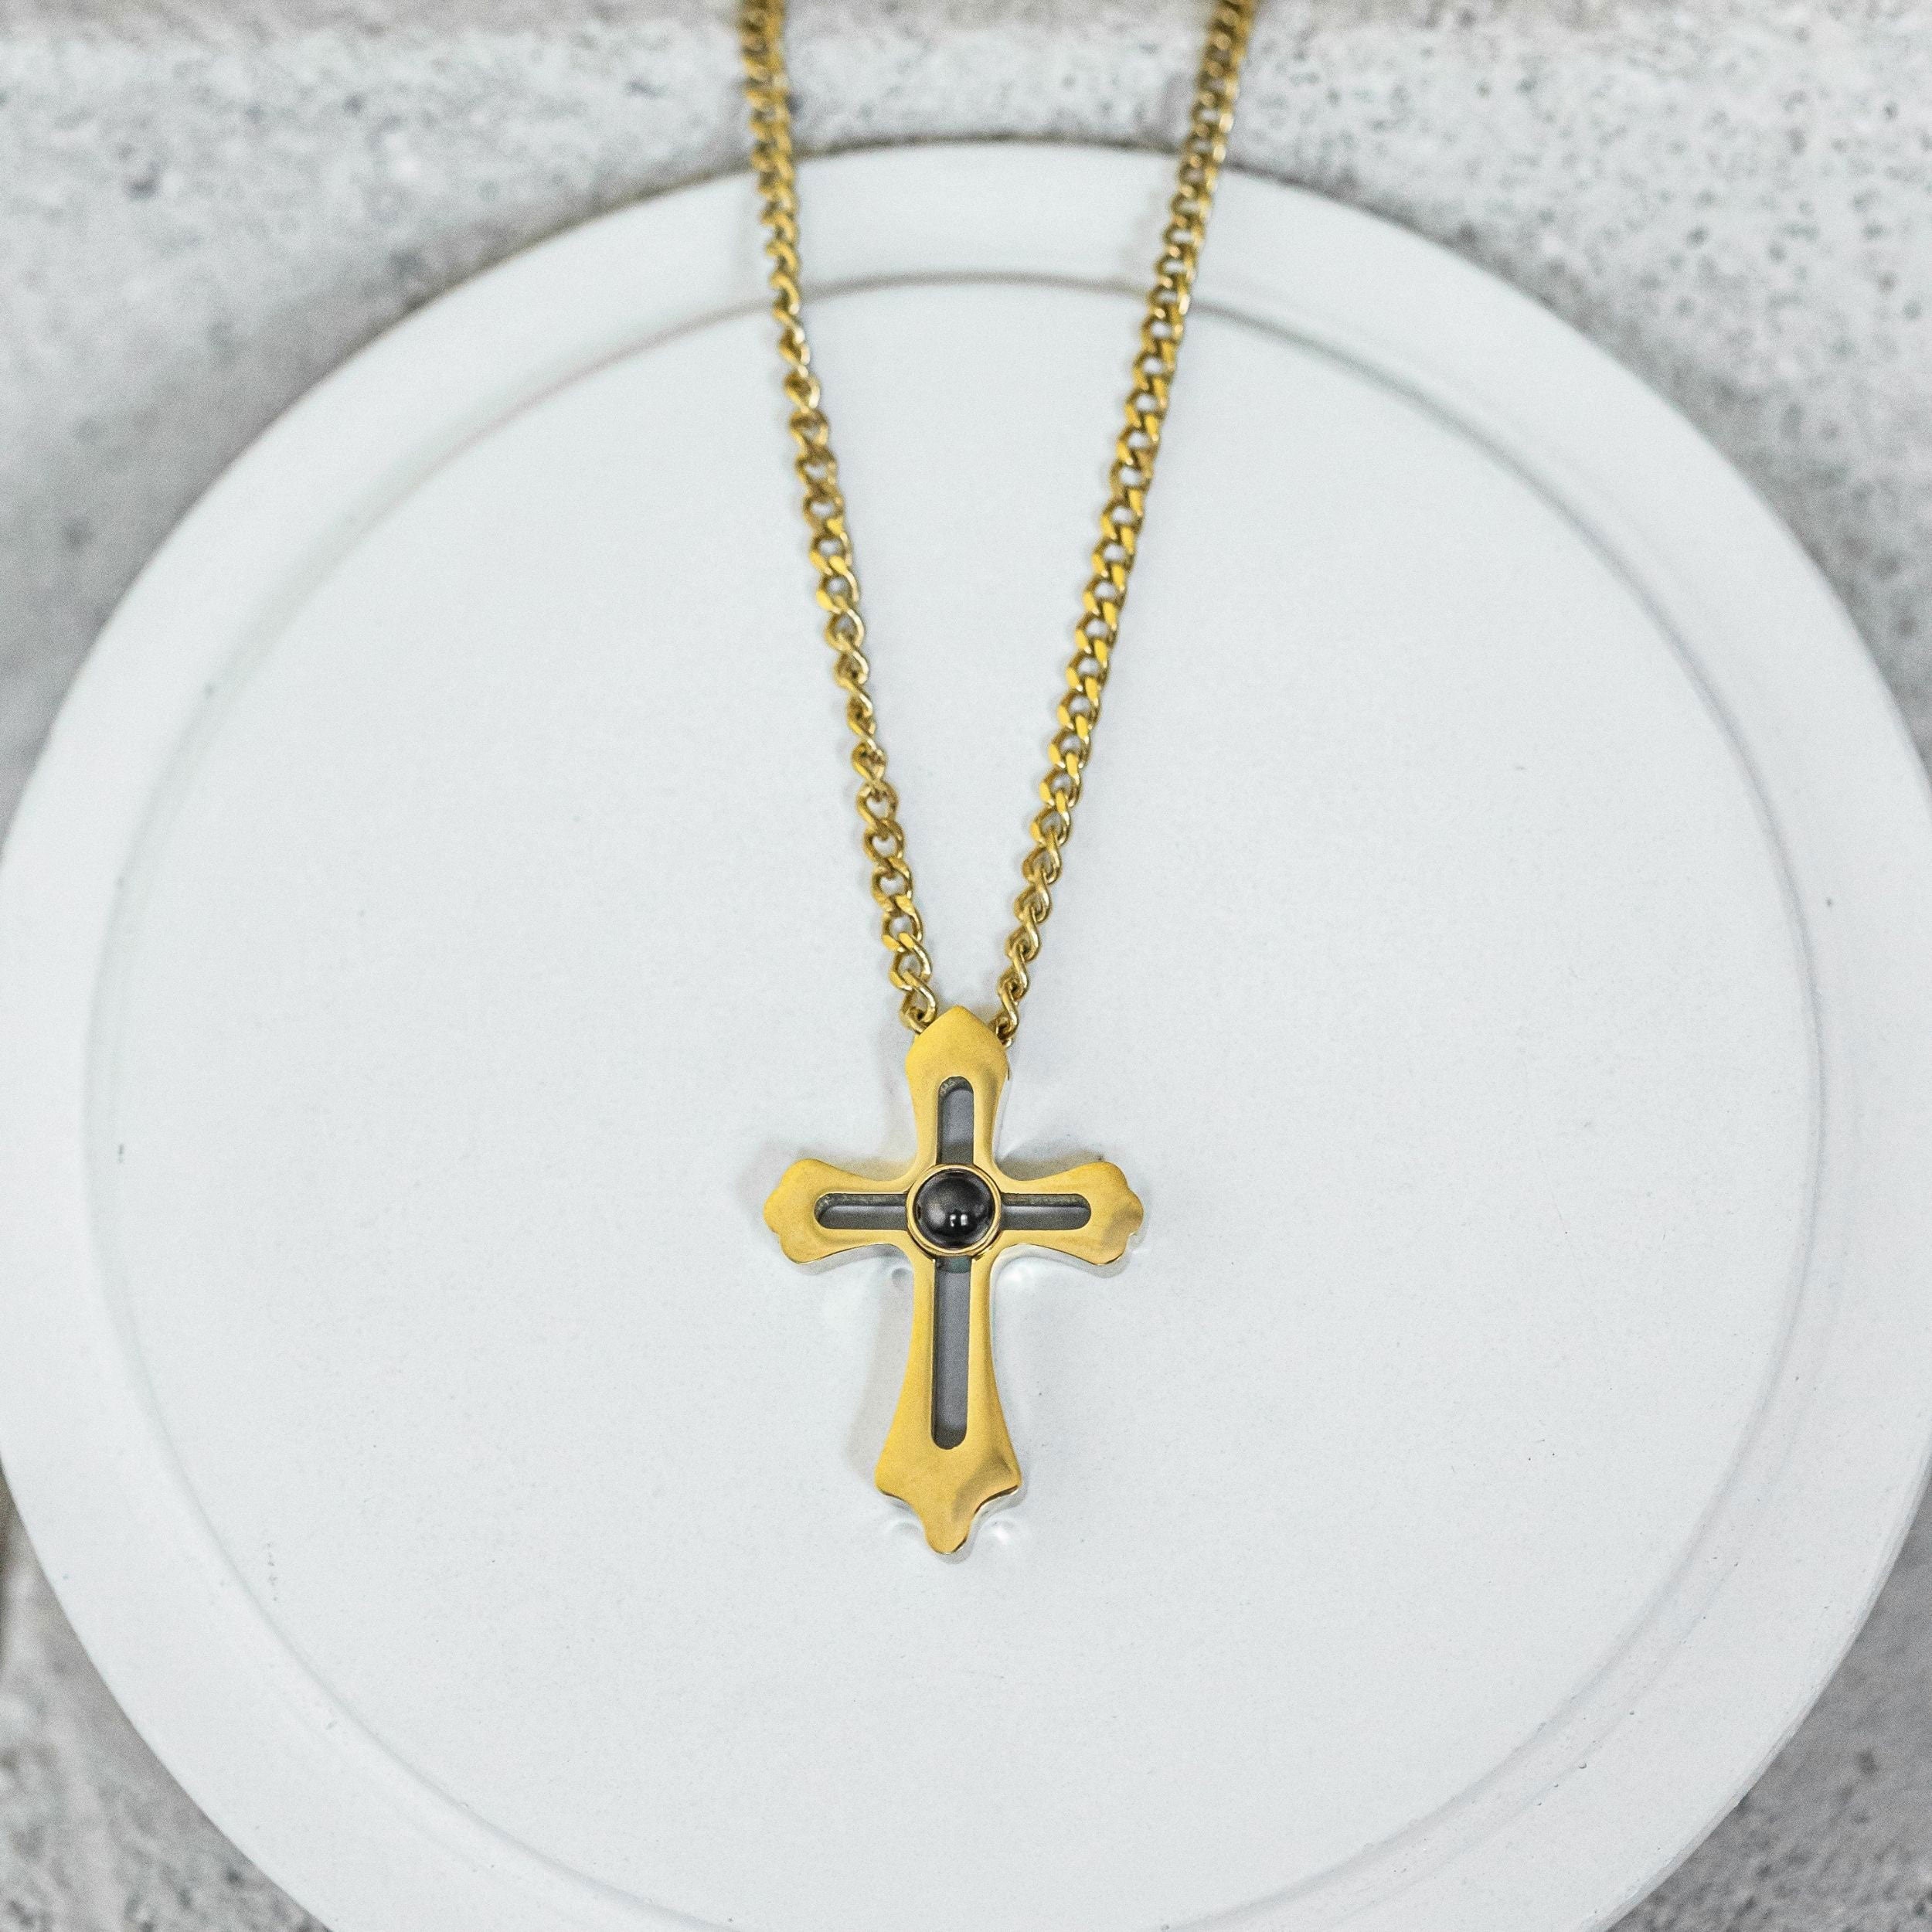 Custom Photo Projection Necklace Personalized Cross Jewelry